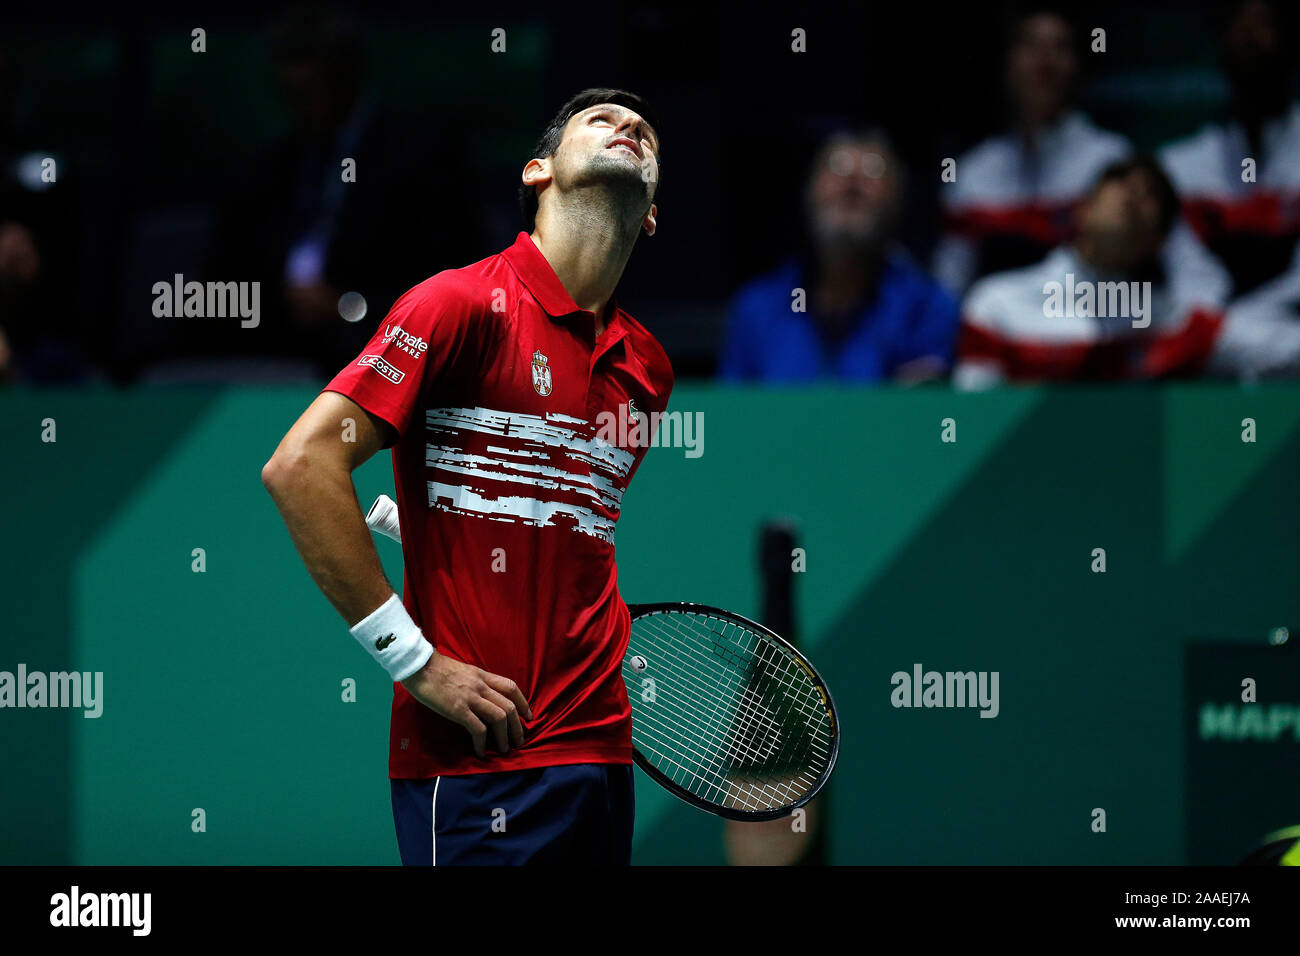 Novak Djokovic of Serbia in action against Benoit Paire of France during Day 4 of the 2019 Davis Cup at La Caja Magica. Stock Photo